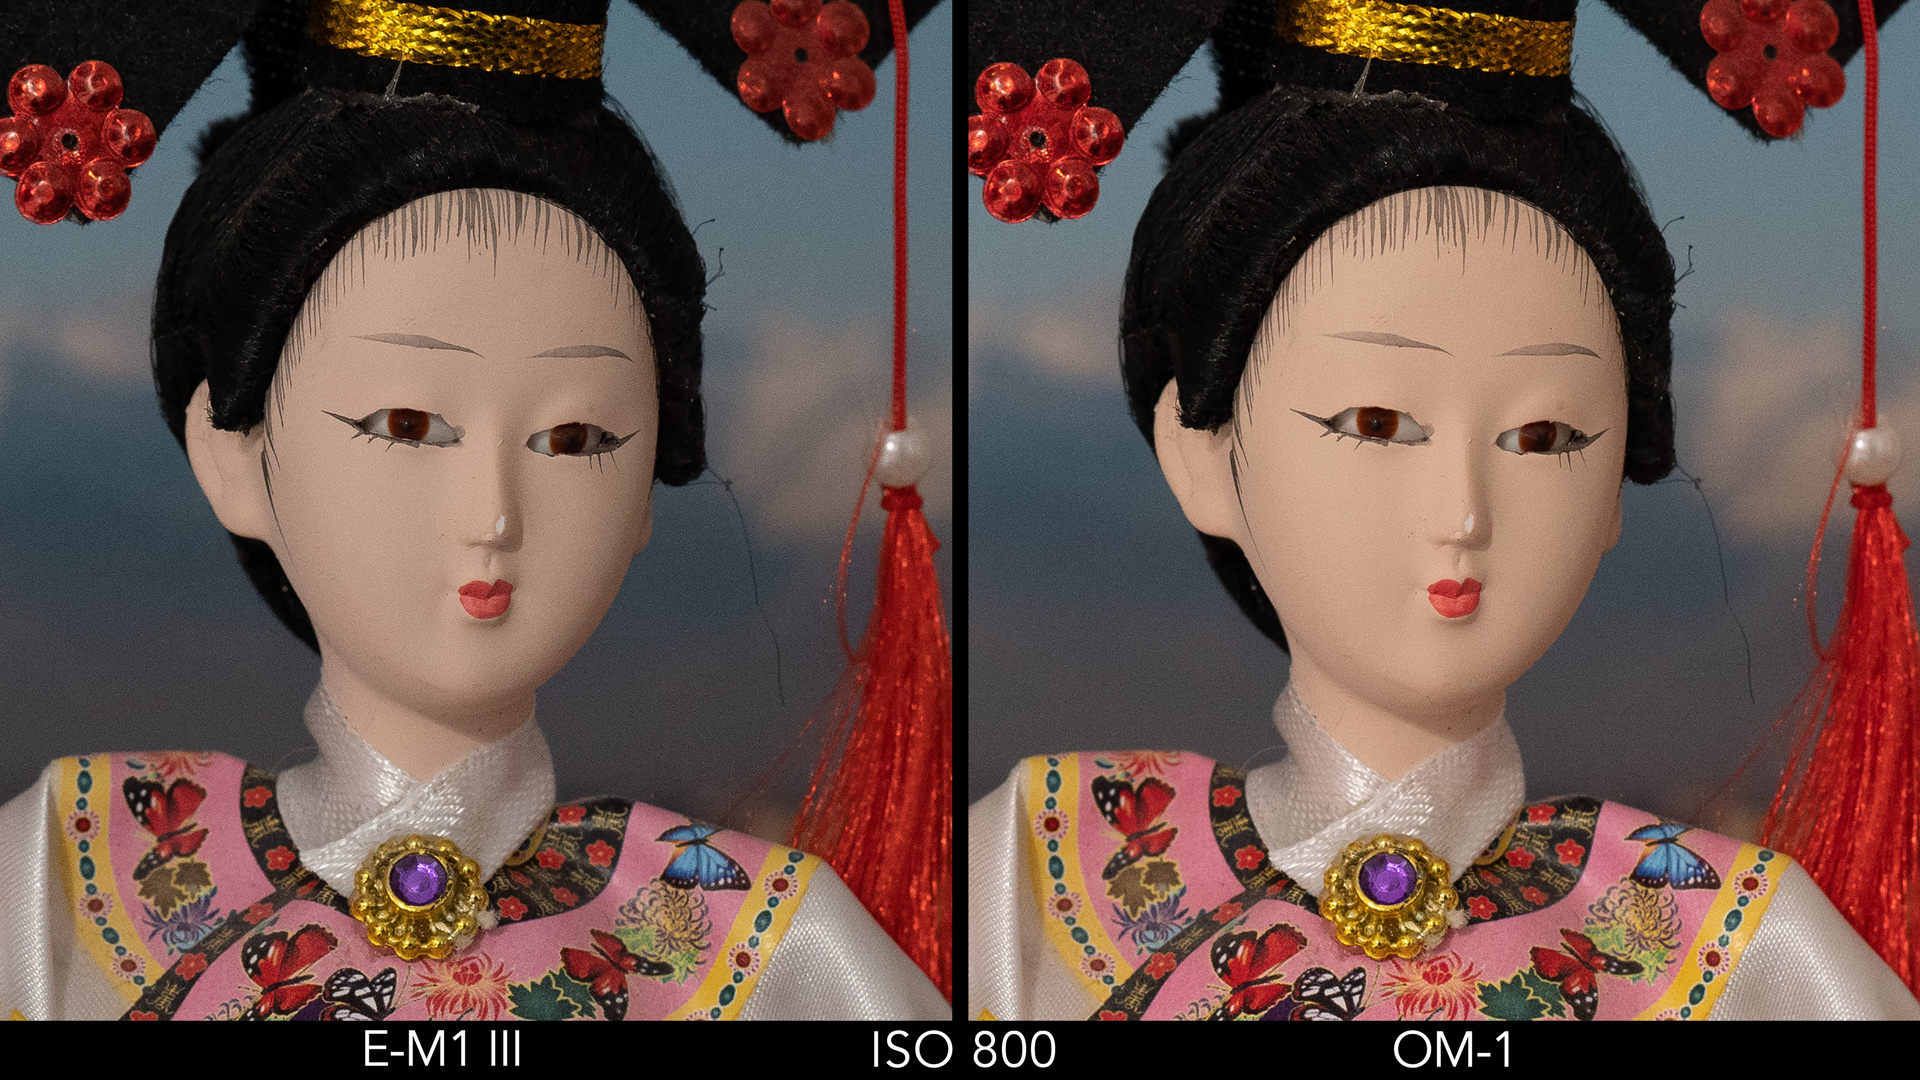 side by side image of a Japanese doll comparing ISO 800 for the E-M1 III and OM-1